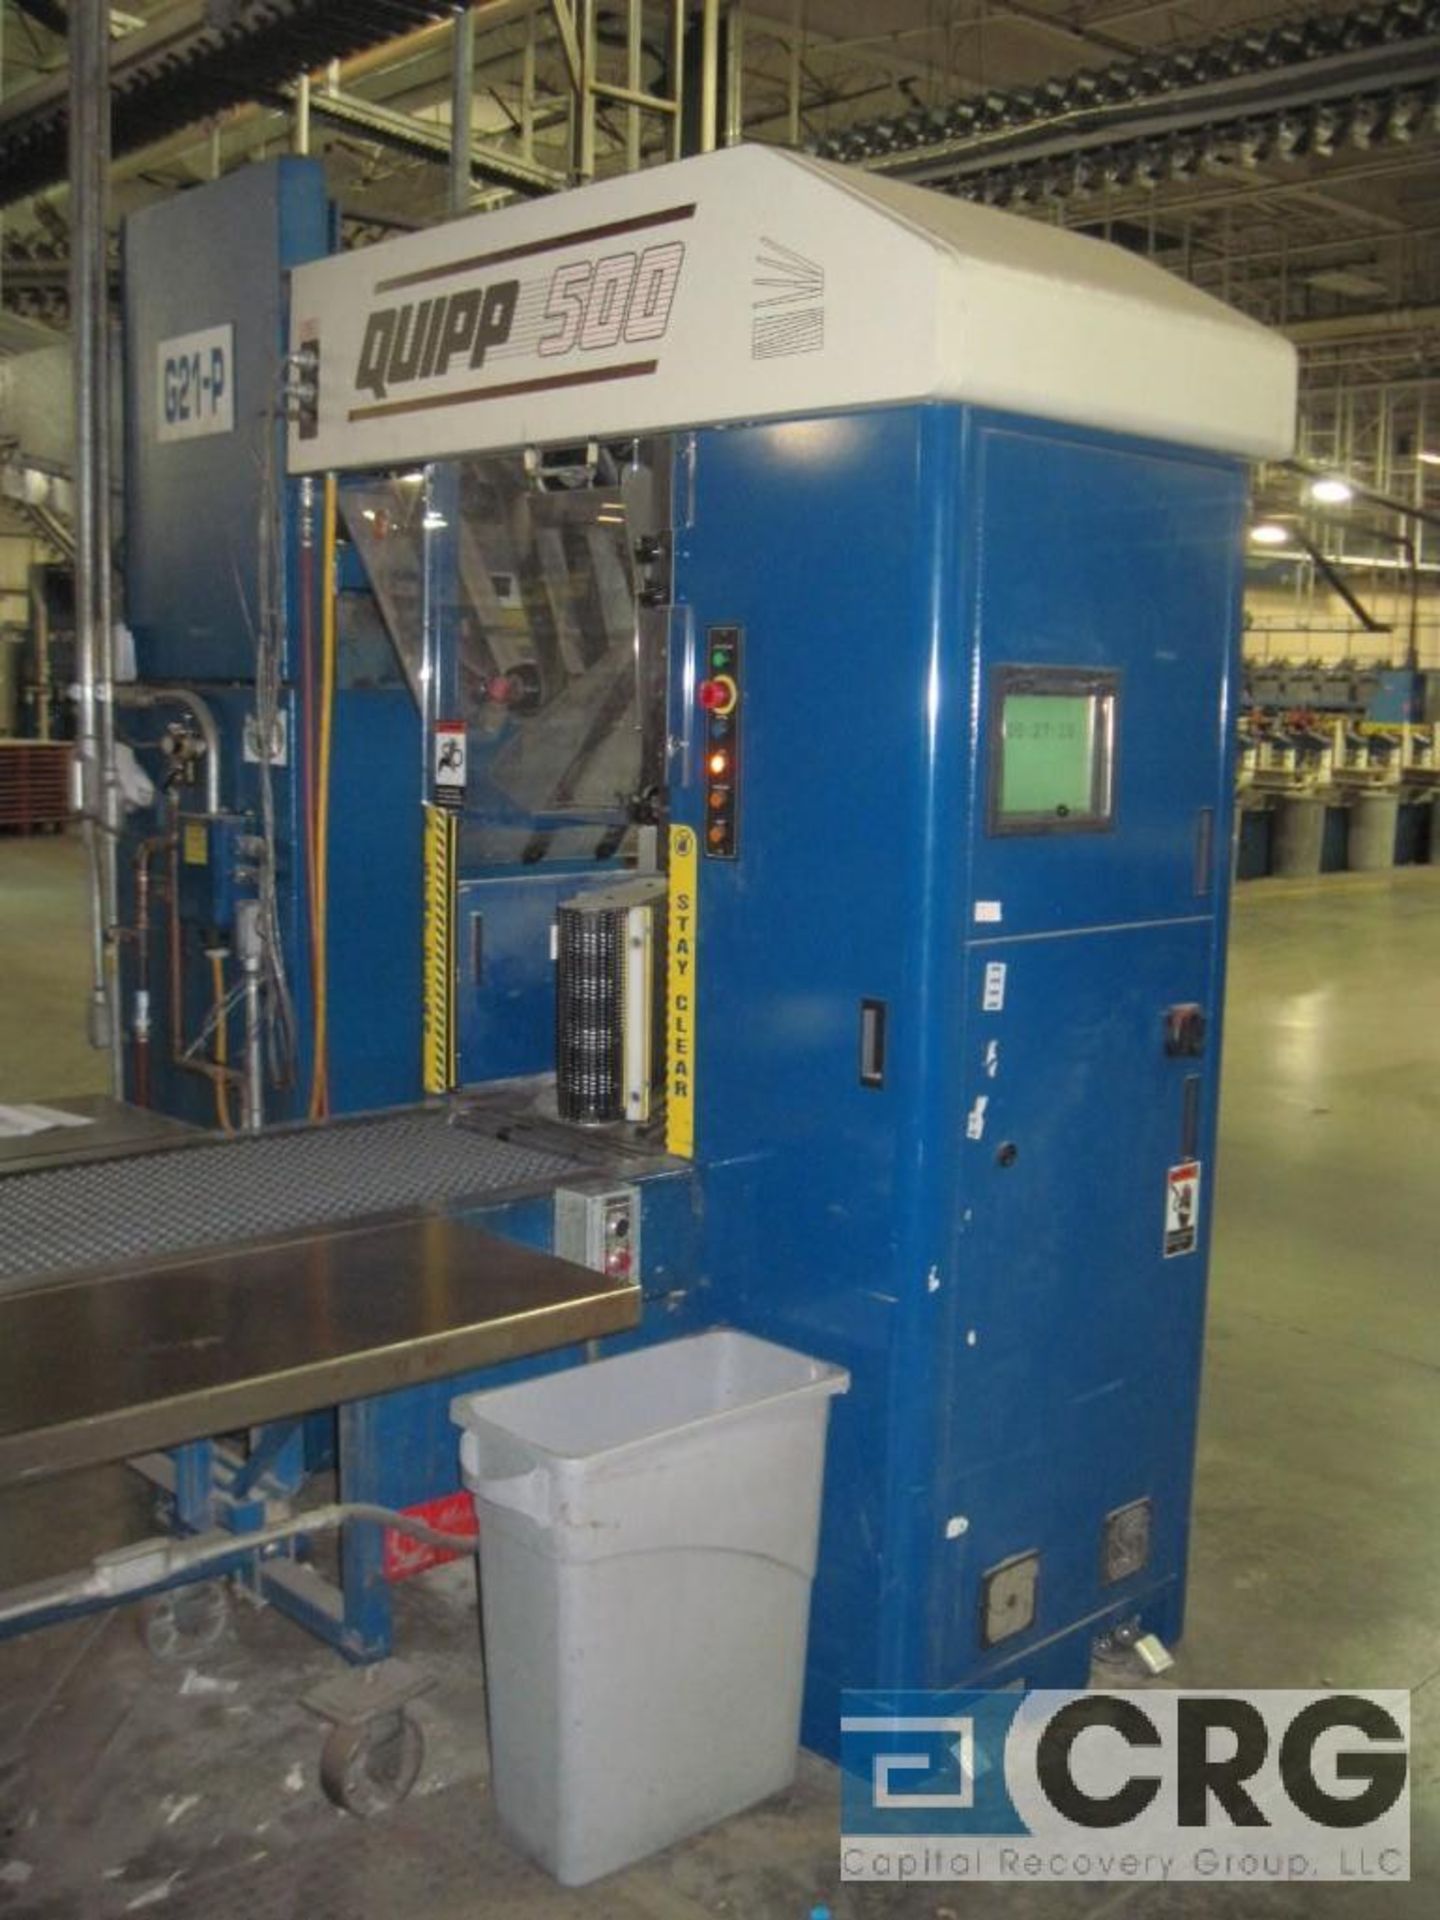 Quipp 500 stacker with rotating table and digital controls, subject to entirety line bid, lot 551 - Image 2 of 4